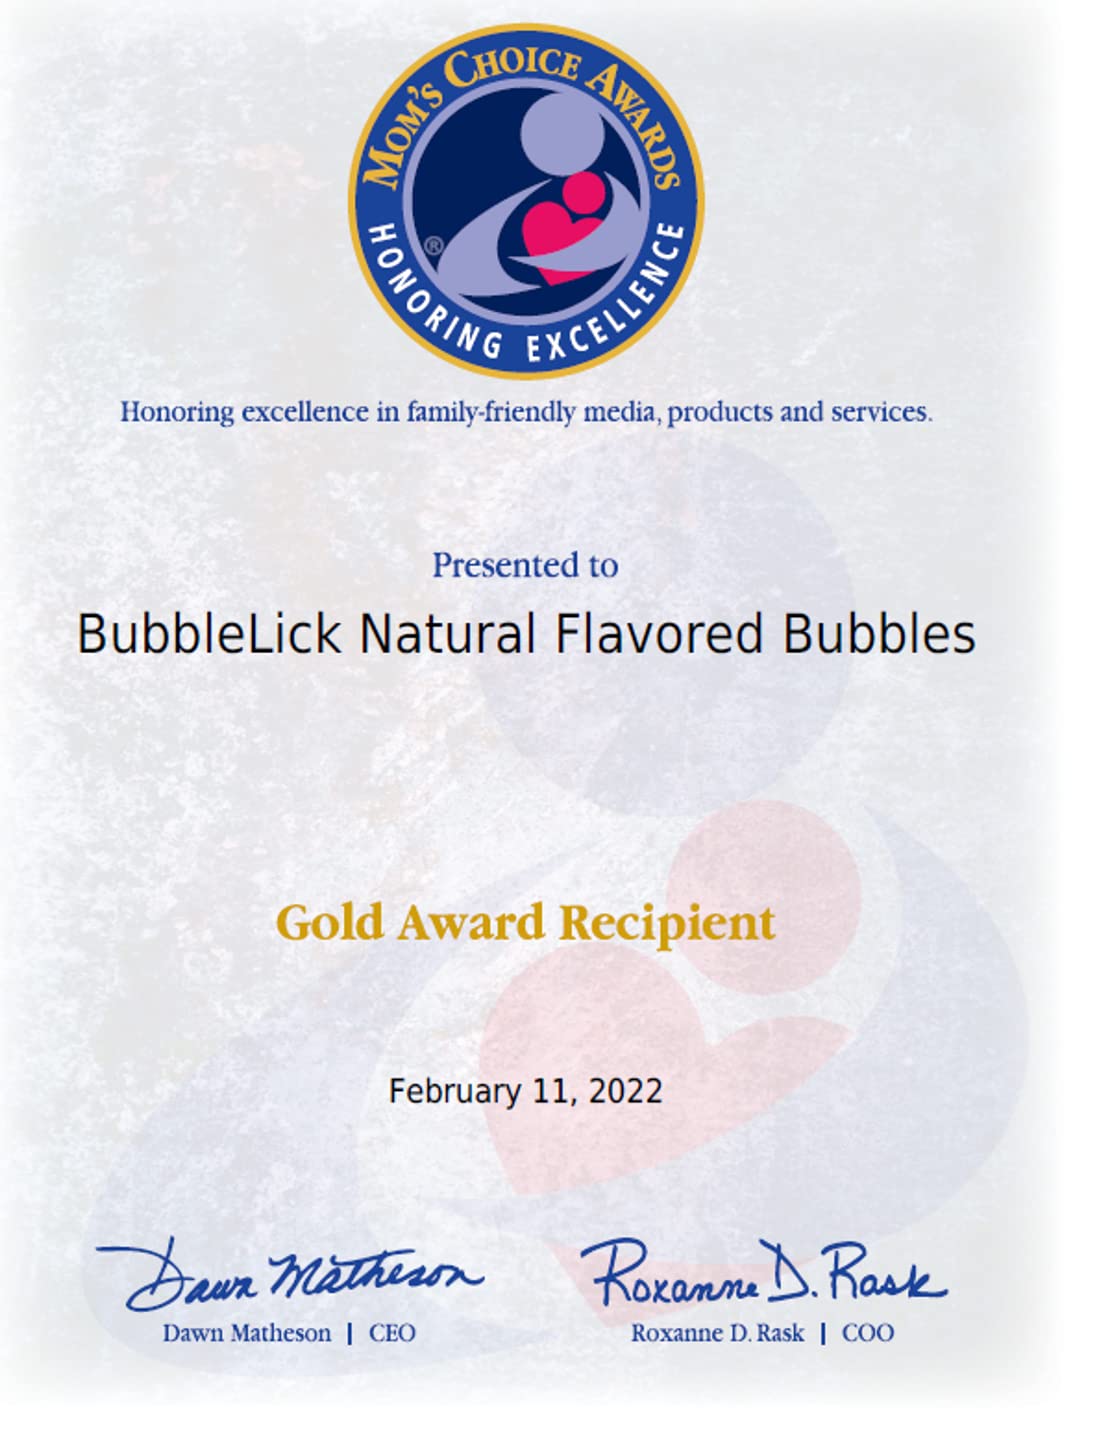 BubbleLick Cotton Candy (2.5 Fl Oz, Pack of 2), Edible Bubbles for Kids and Dogs - Premium Natural Flavored Bubble Solution, Great for Bubble Machines, Toys, and Refillable Bubble Solution